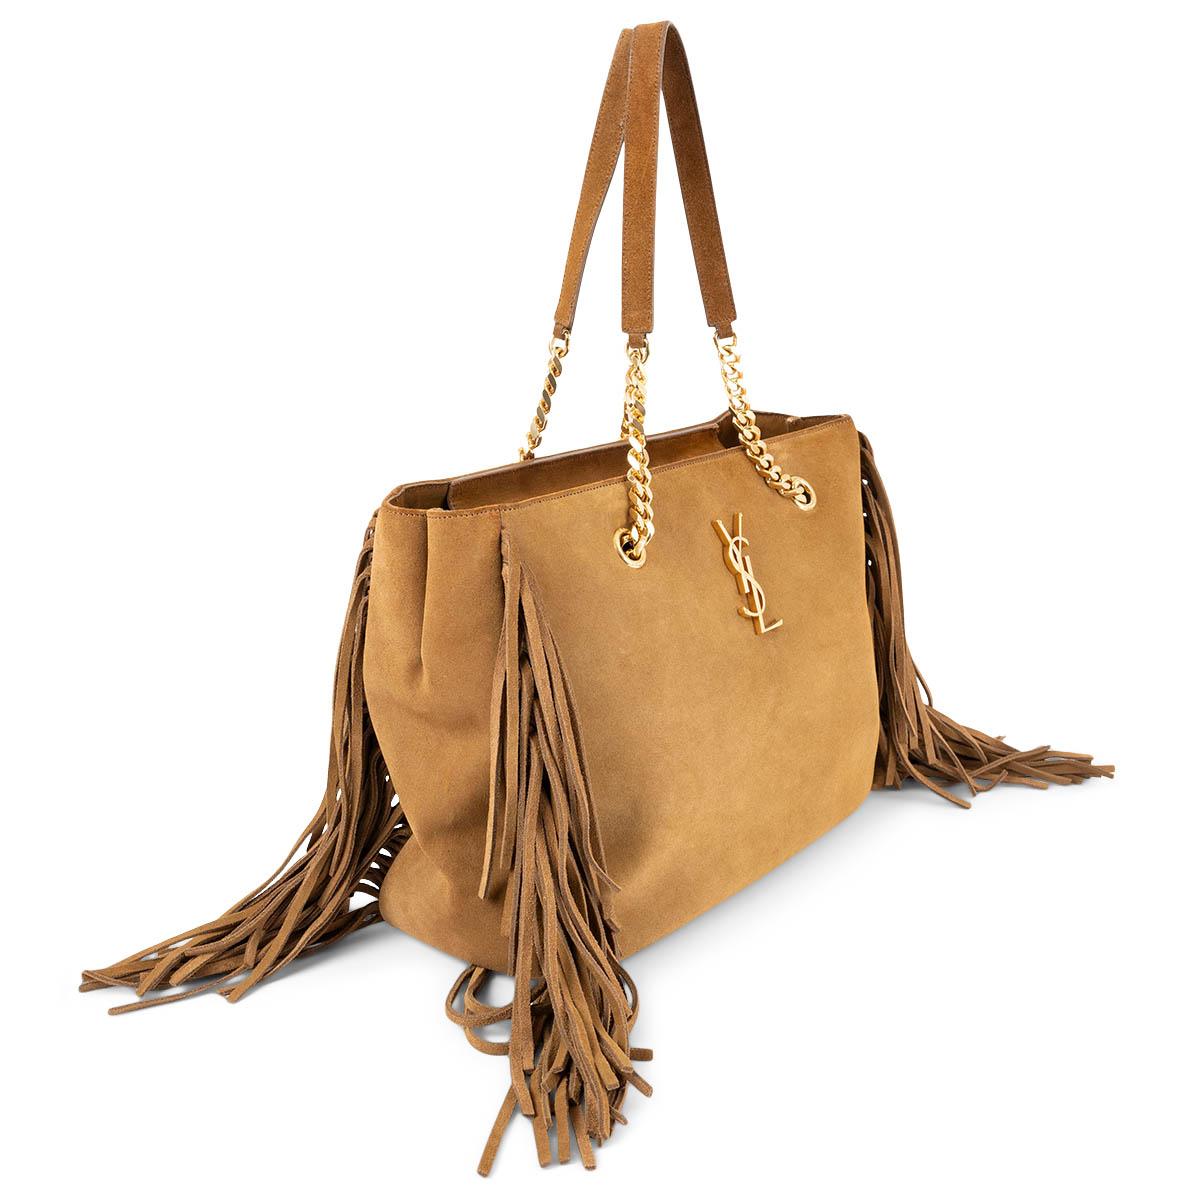 100% authentic Saint Laurent shopper bag in tan suede leather featuring gold-tone hardware. The design comes with fringe trim on the side, shoulder straps with curb-chain insets and a gold-tone glossy monogram logo on the front. Opens with a zipper